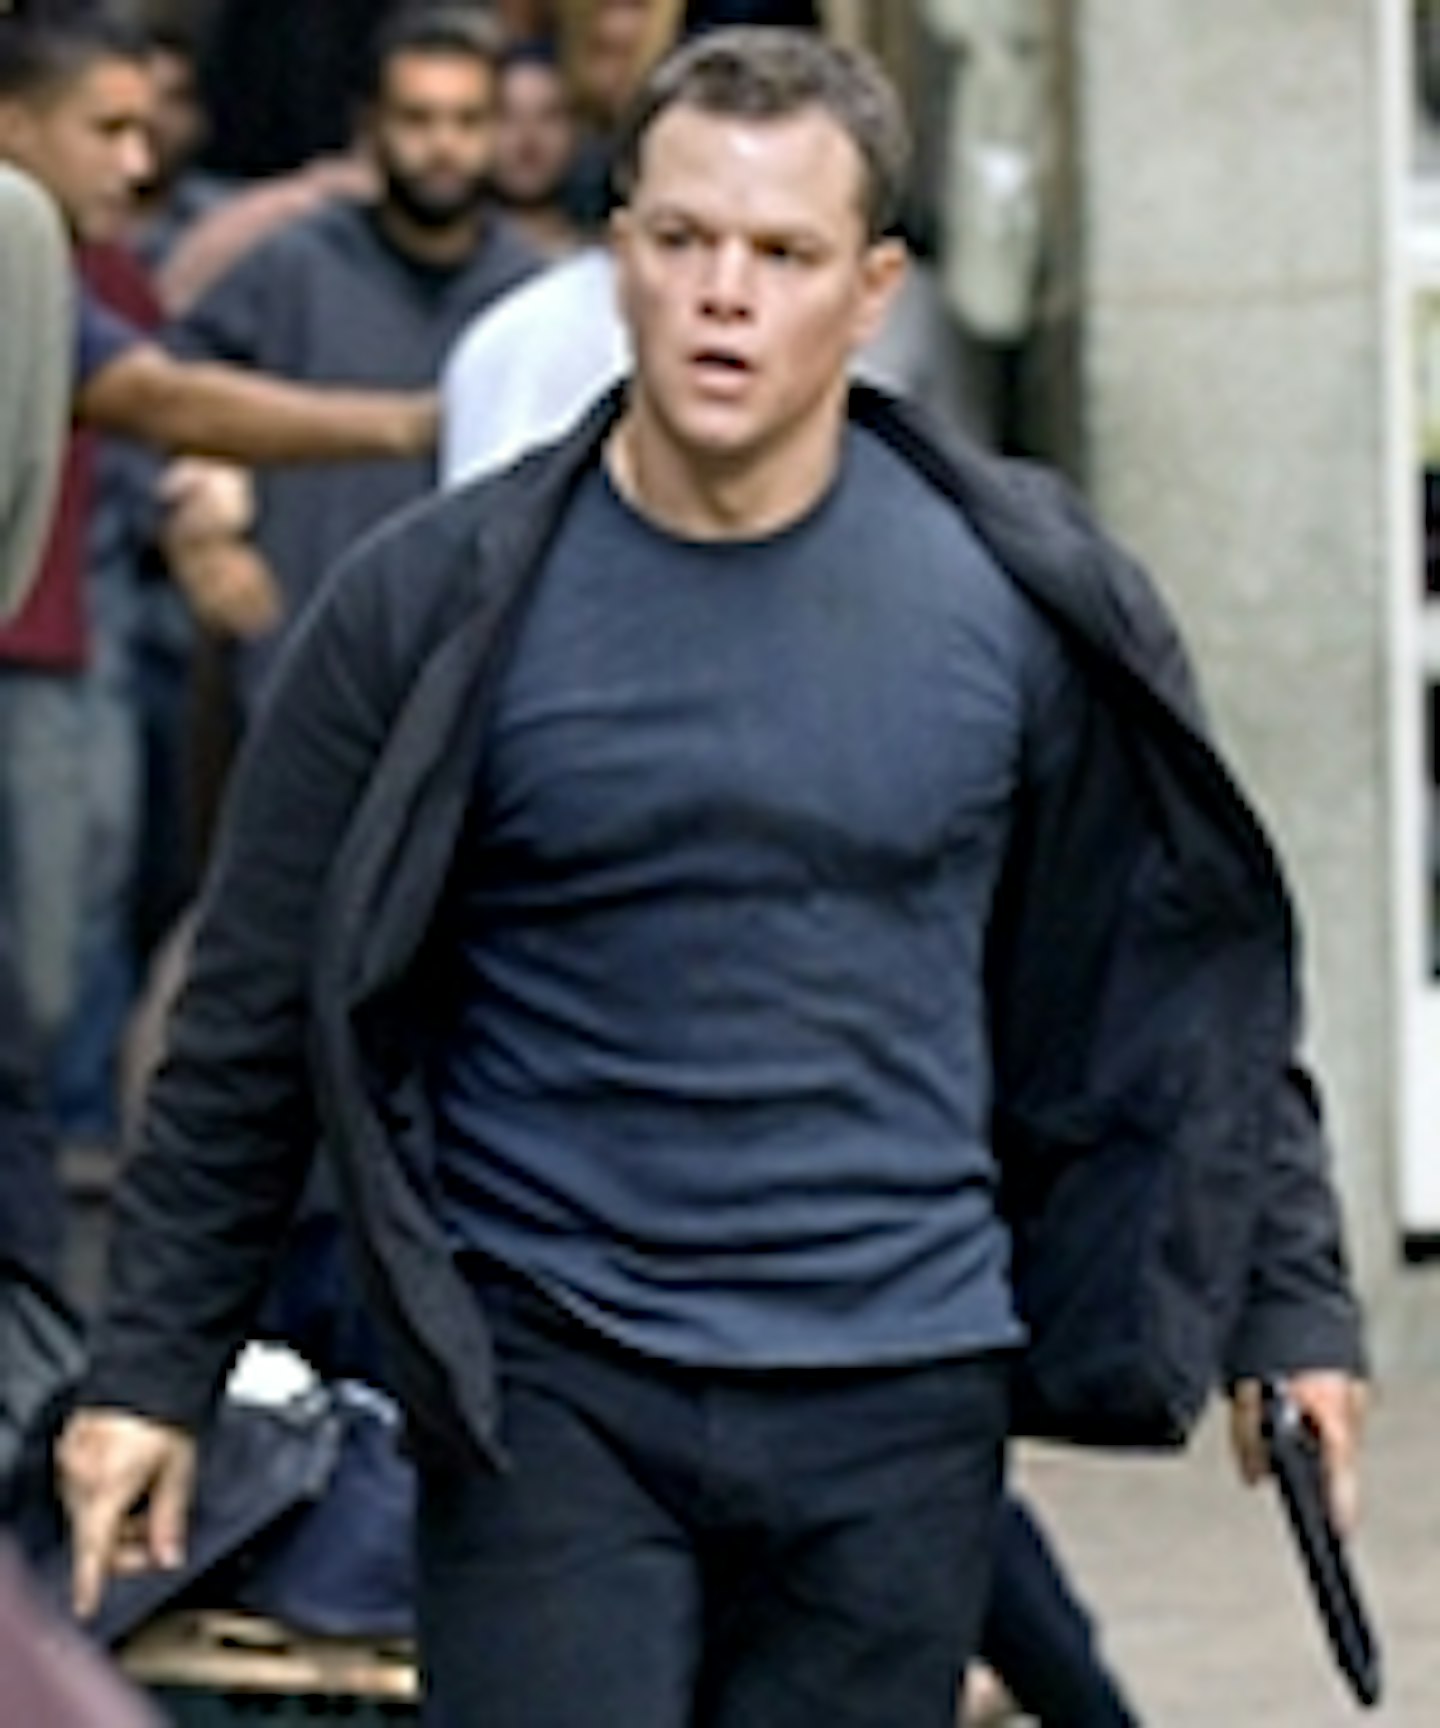 Bourne 4 Has A New Writer